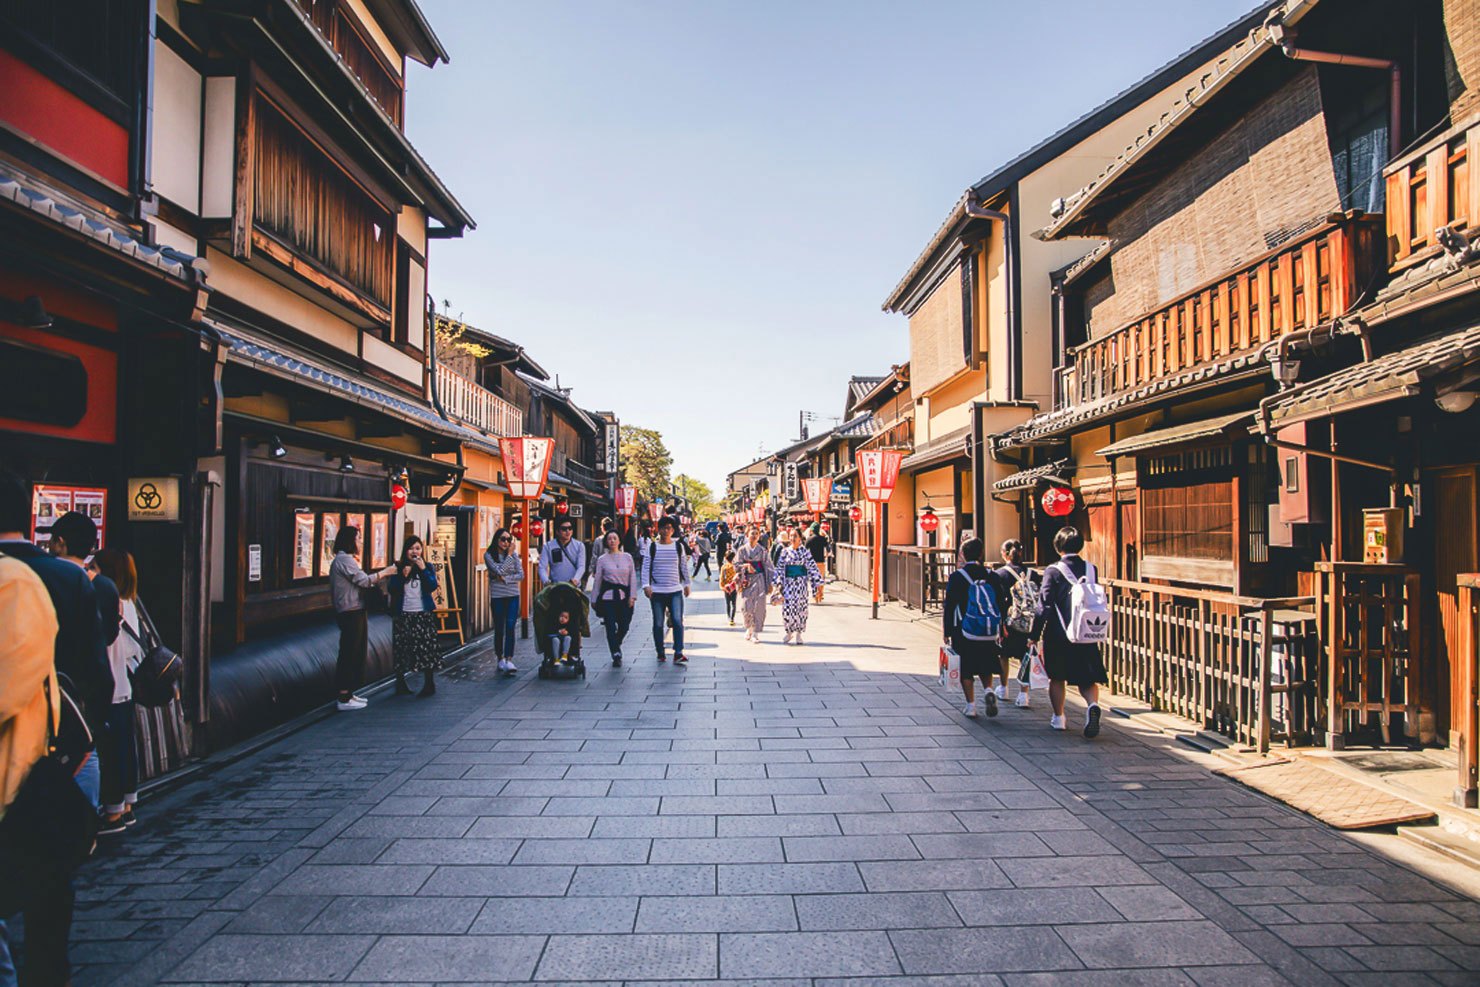 5. Gion District